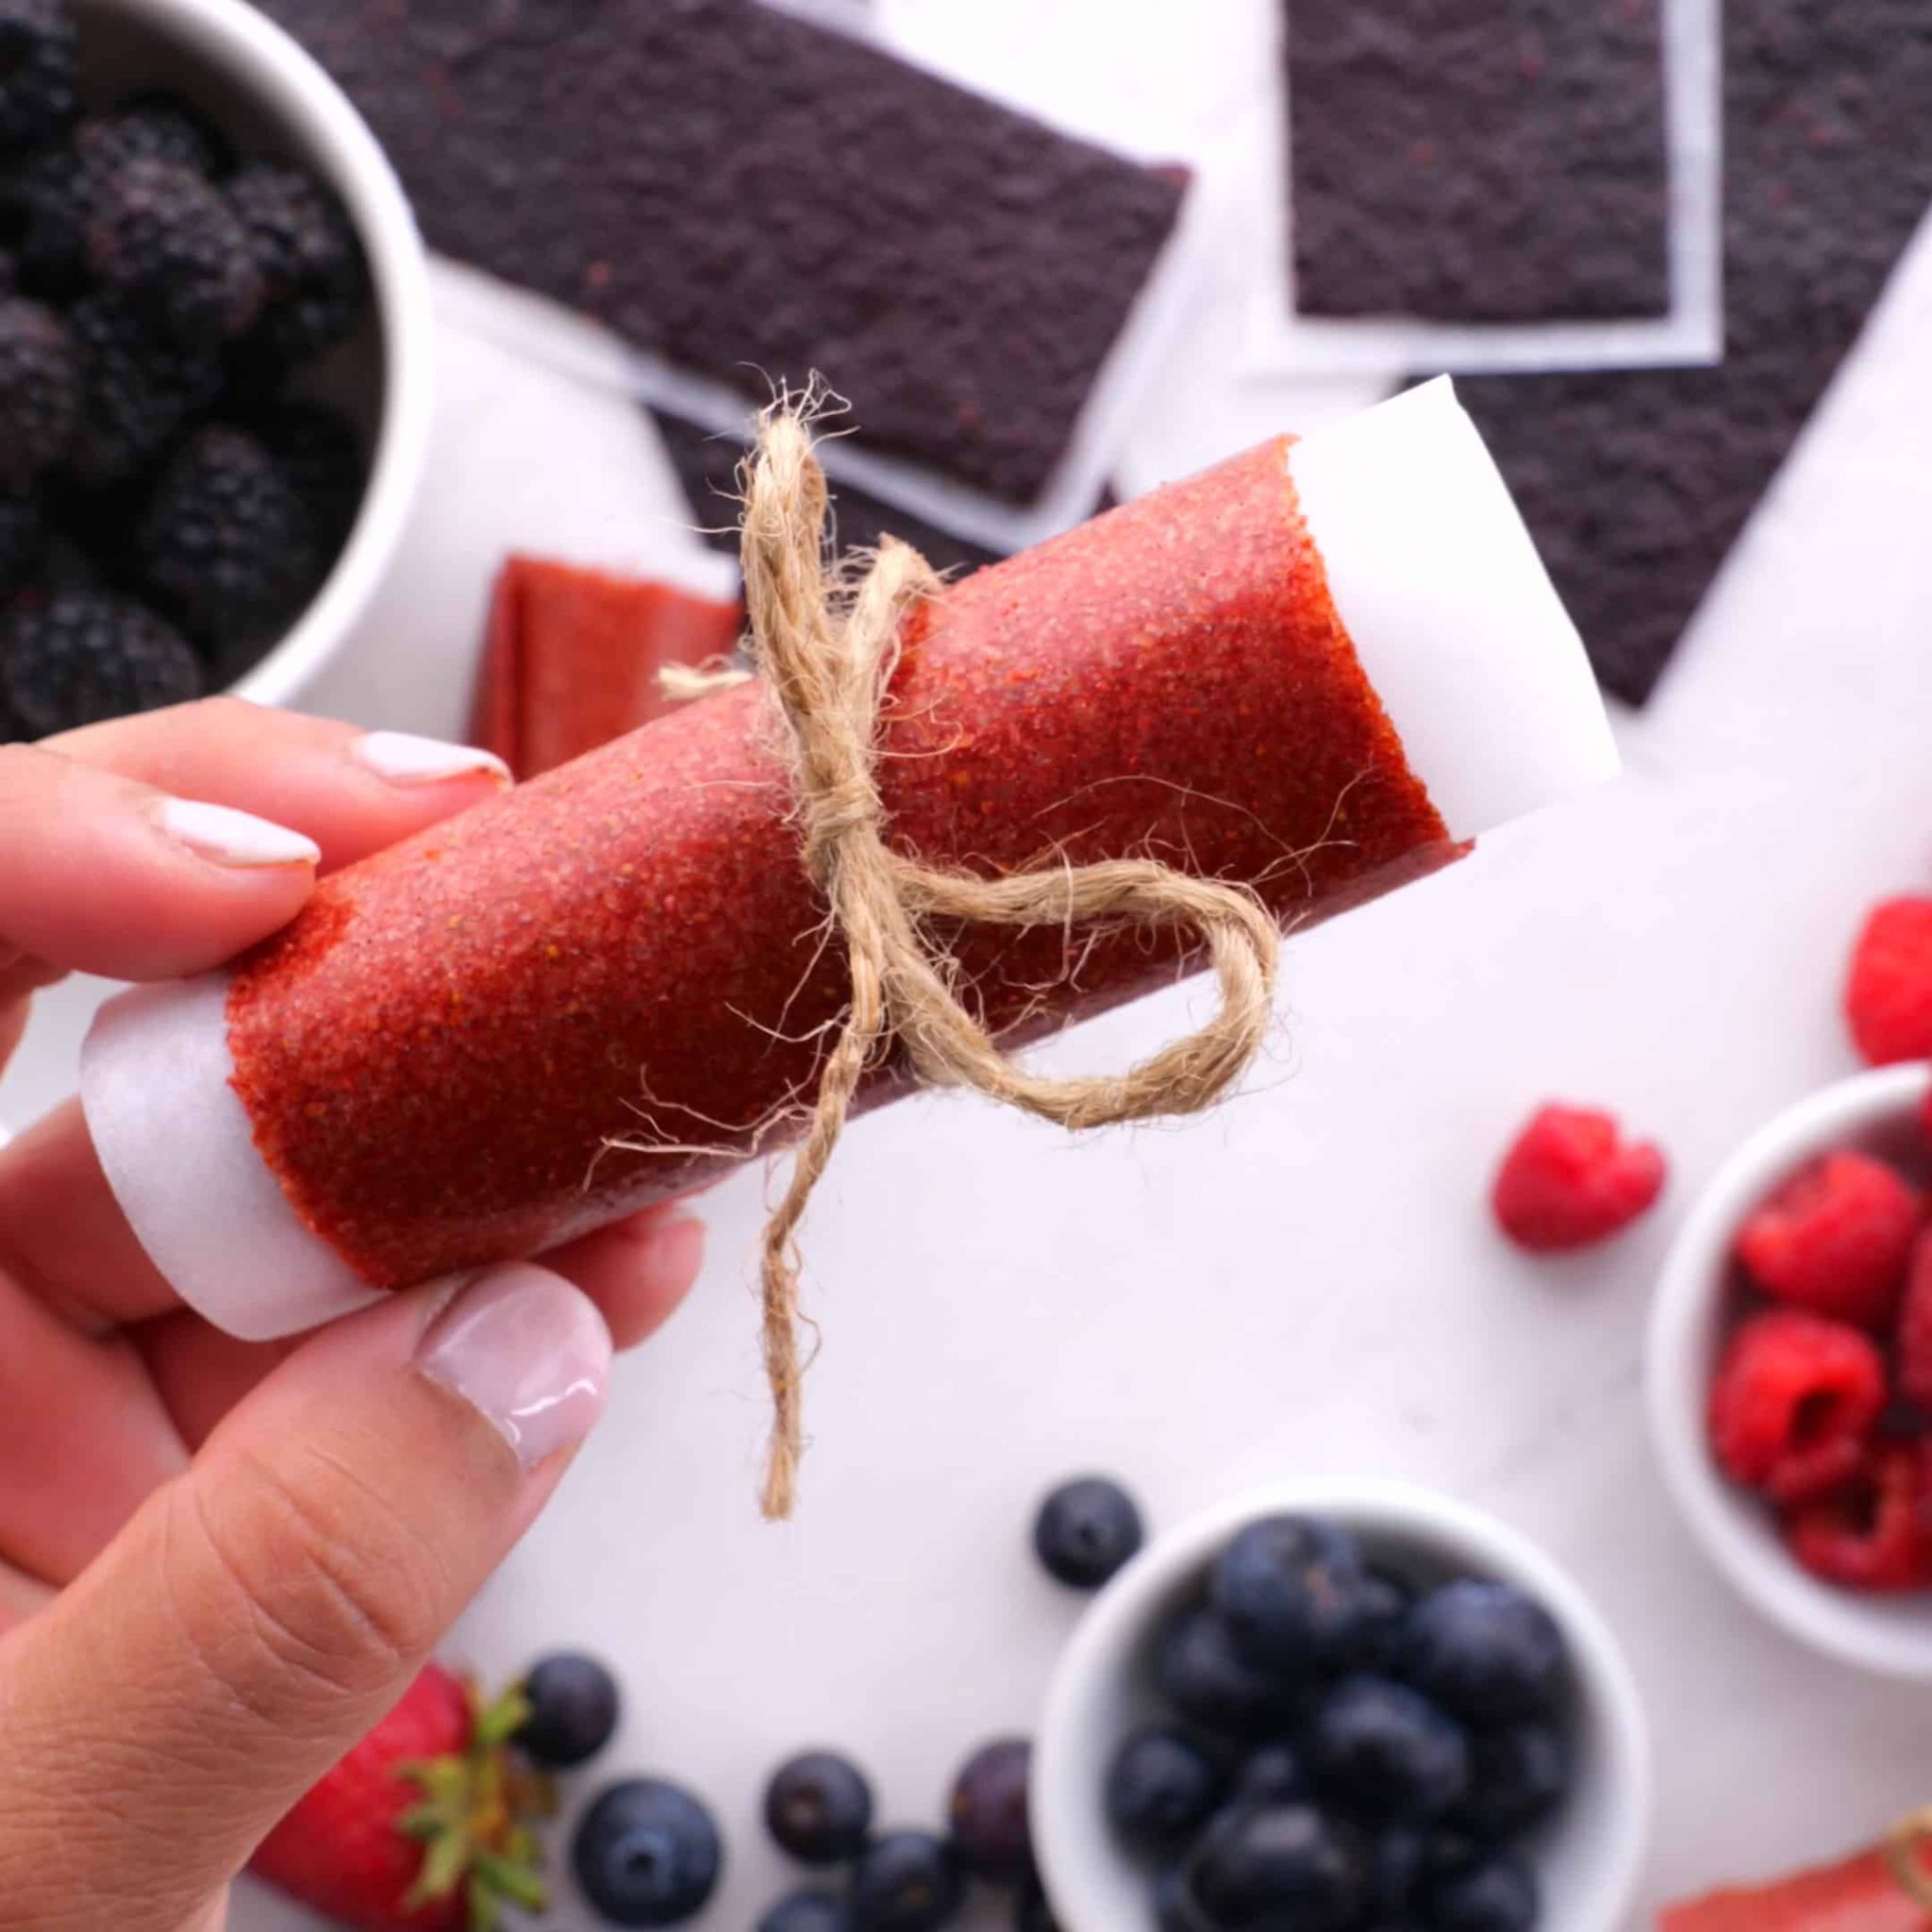 Enjoy your fresh homemade fruit leather or fruit roll ups as a tasty naturally-sweet snack, or for lunch. It's the perfect back-to-school recipe. 